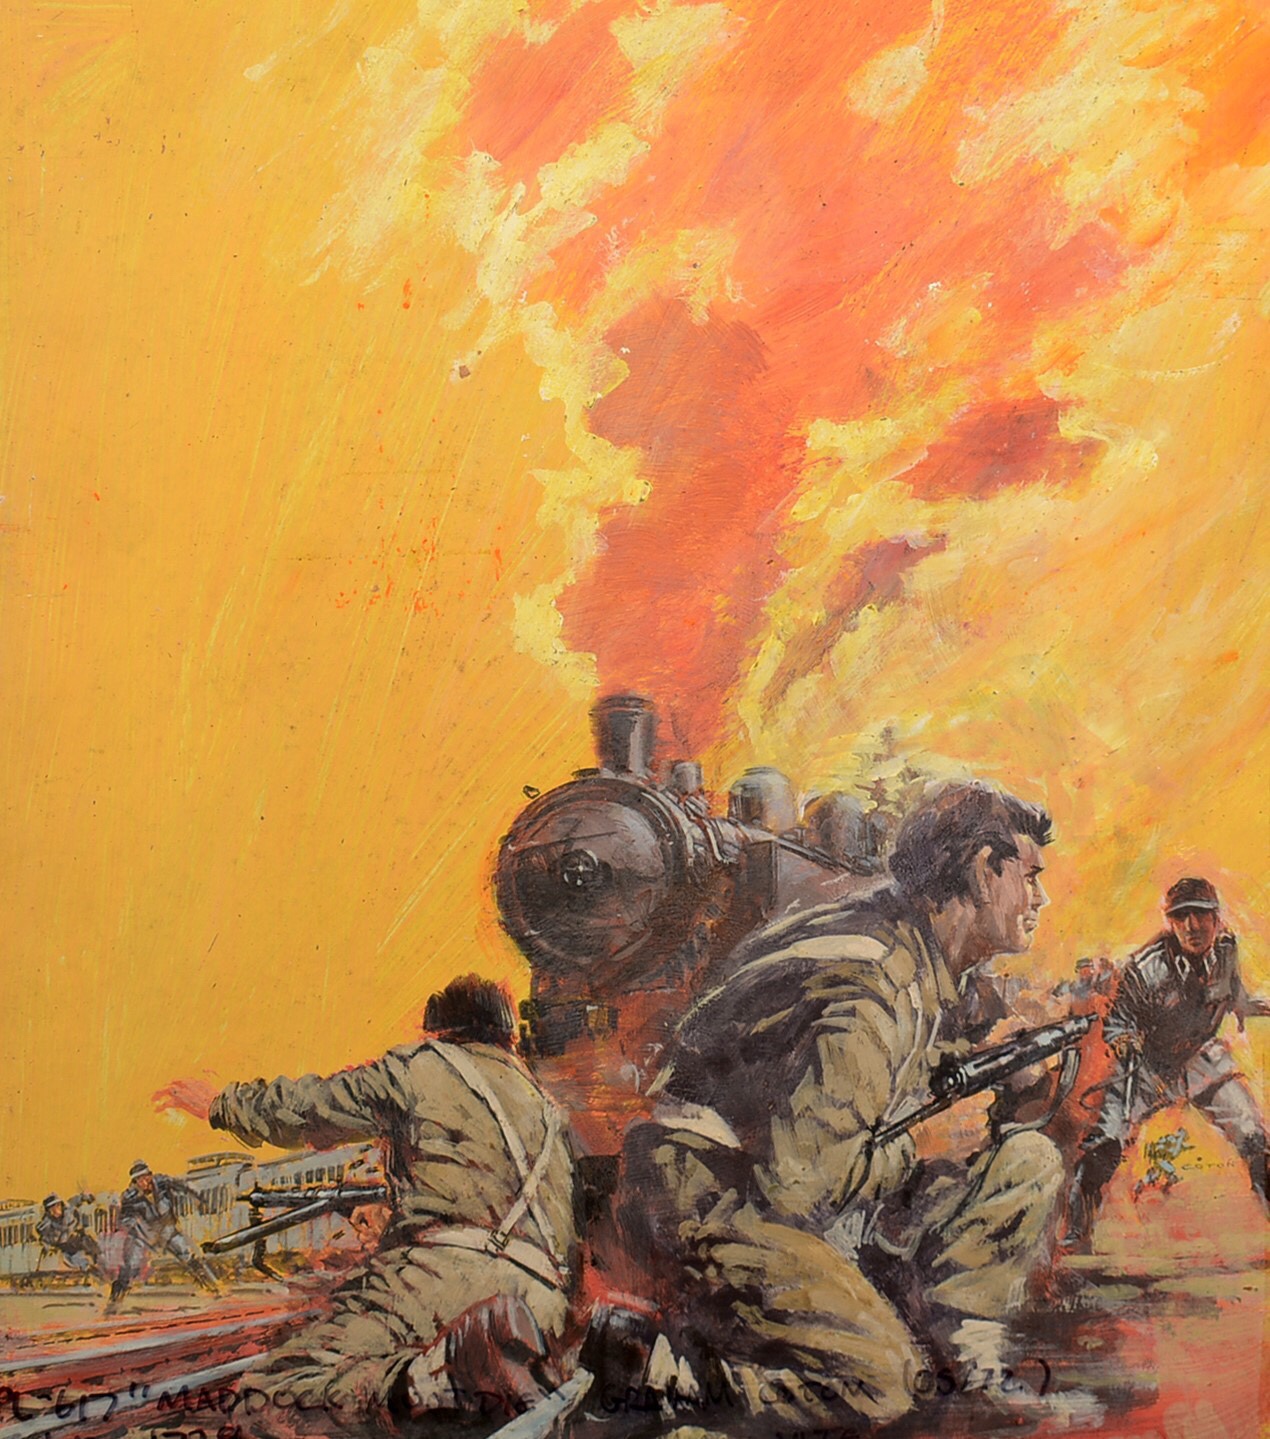 Original Art Work for the front cover of Battle Picture Library, No. 561 'Fire in the East', by Graham Goton